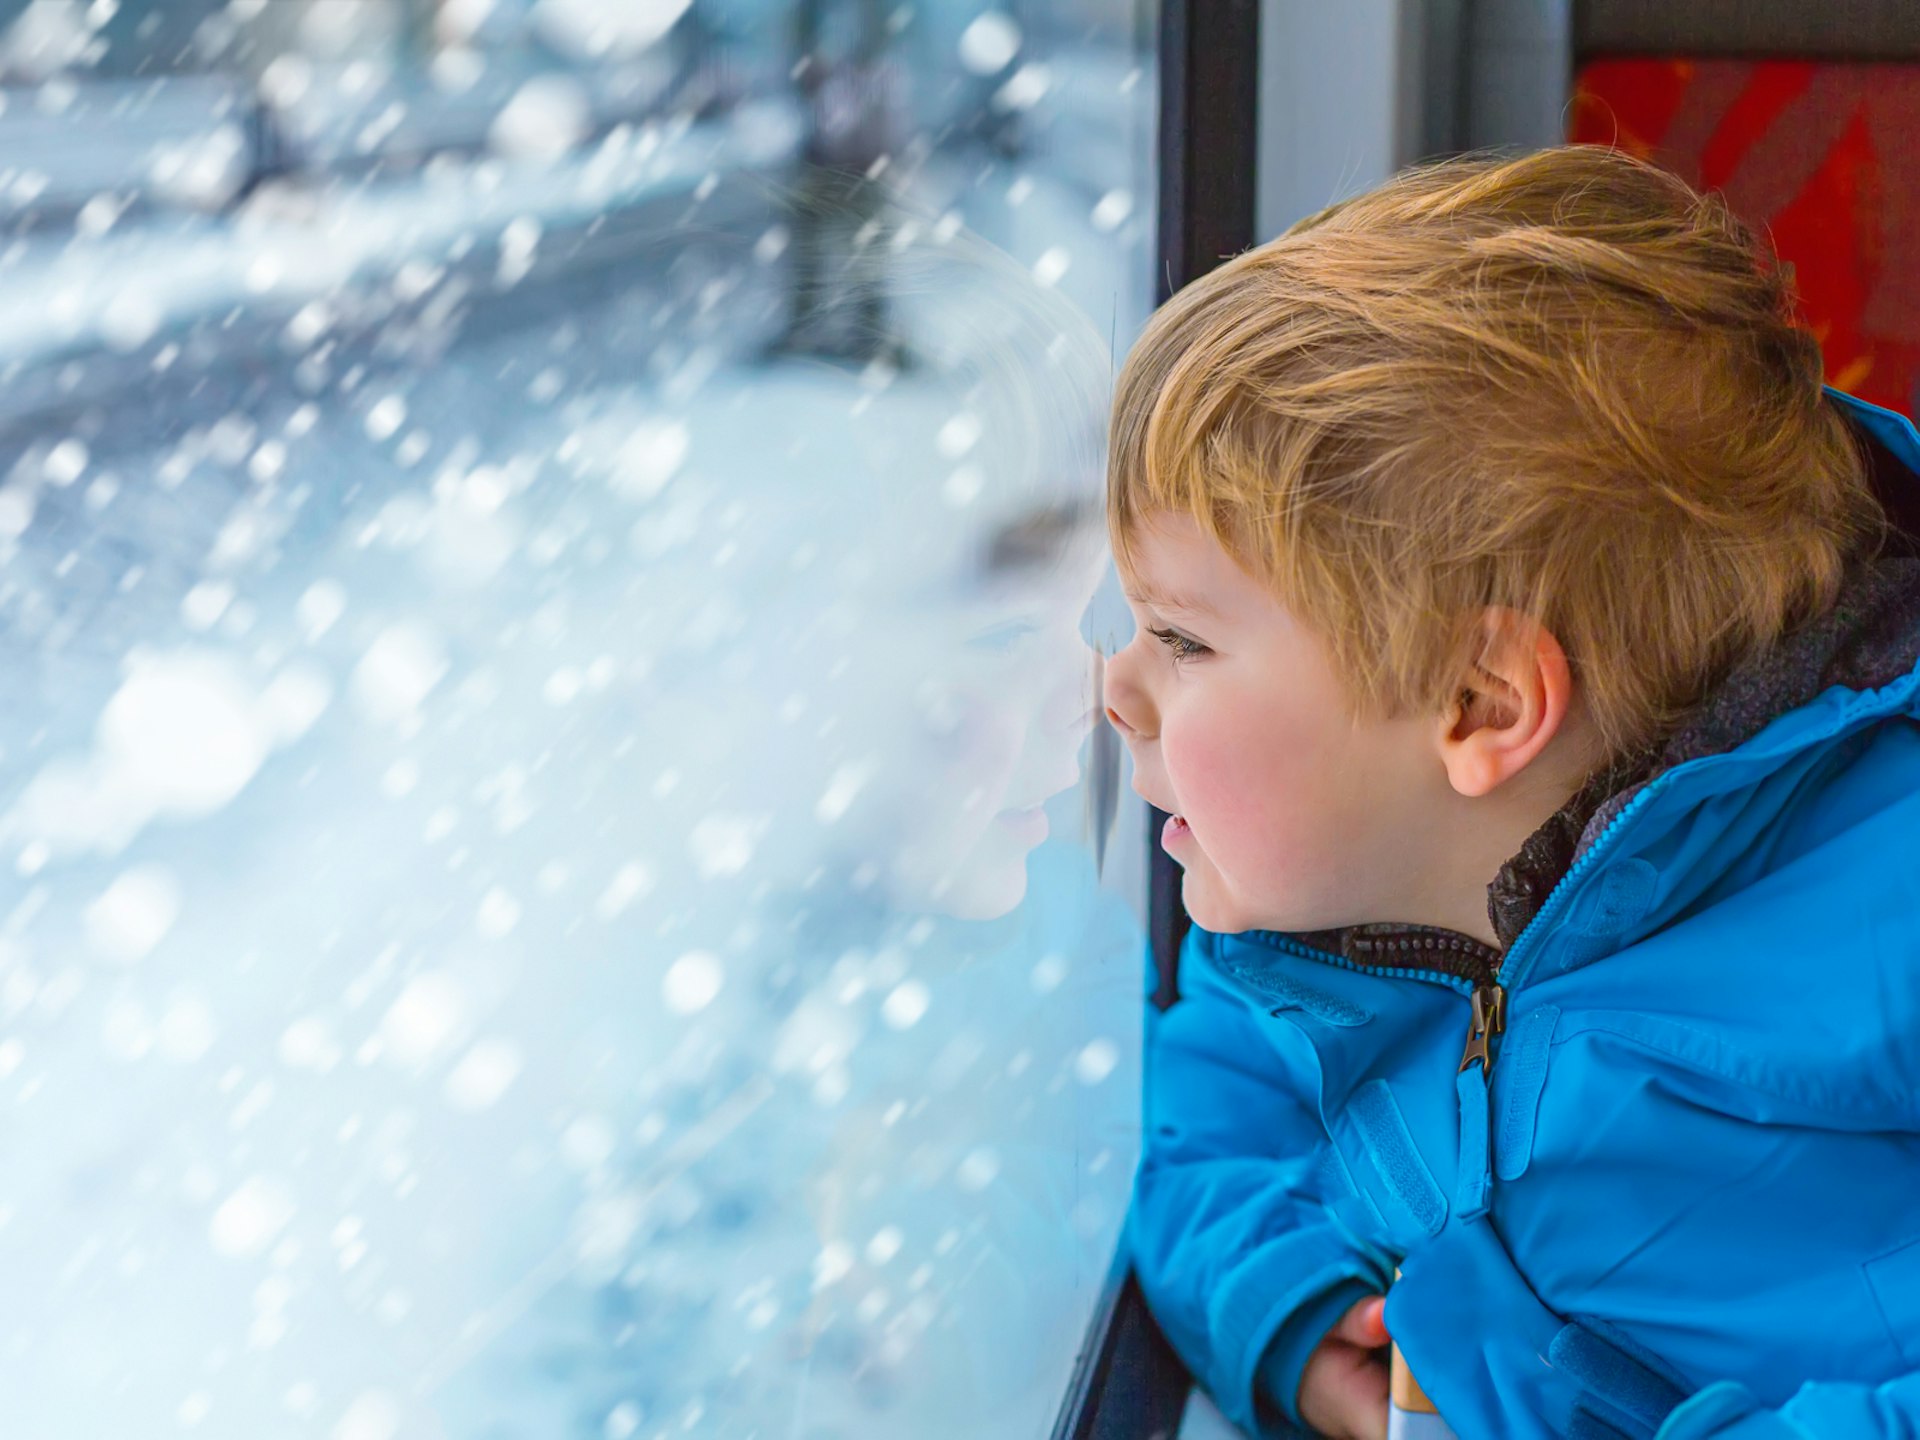 A young boy with his face pressed up against a train window watching snow fall outside